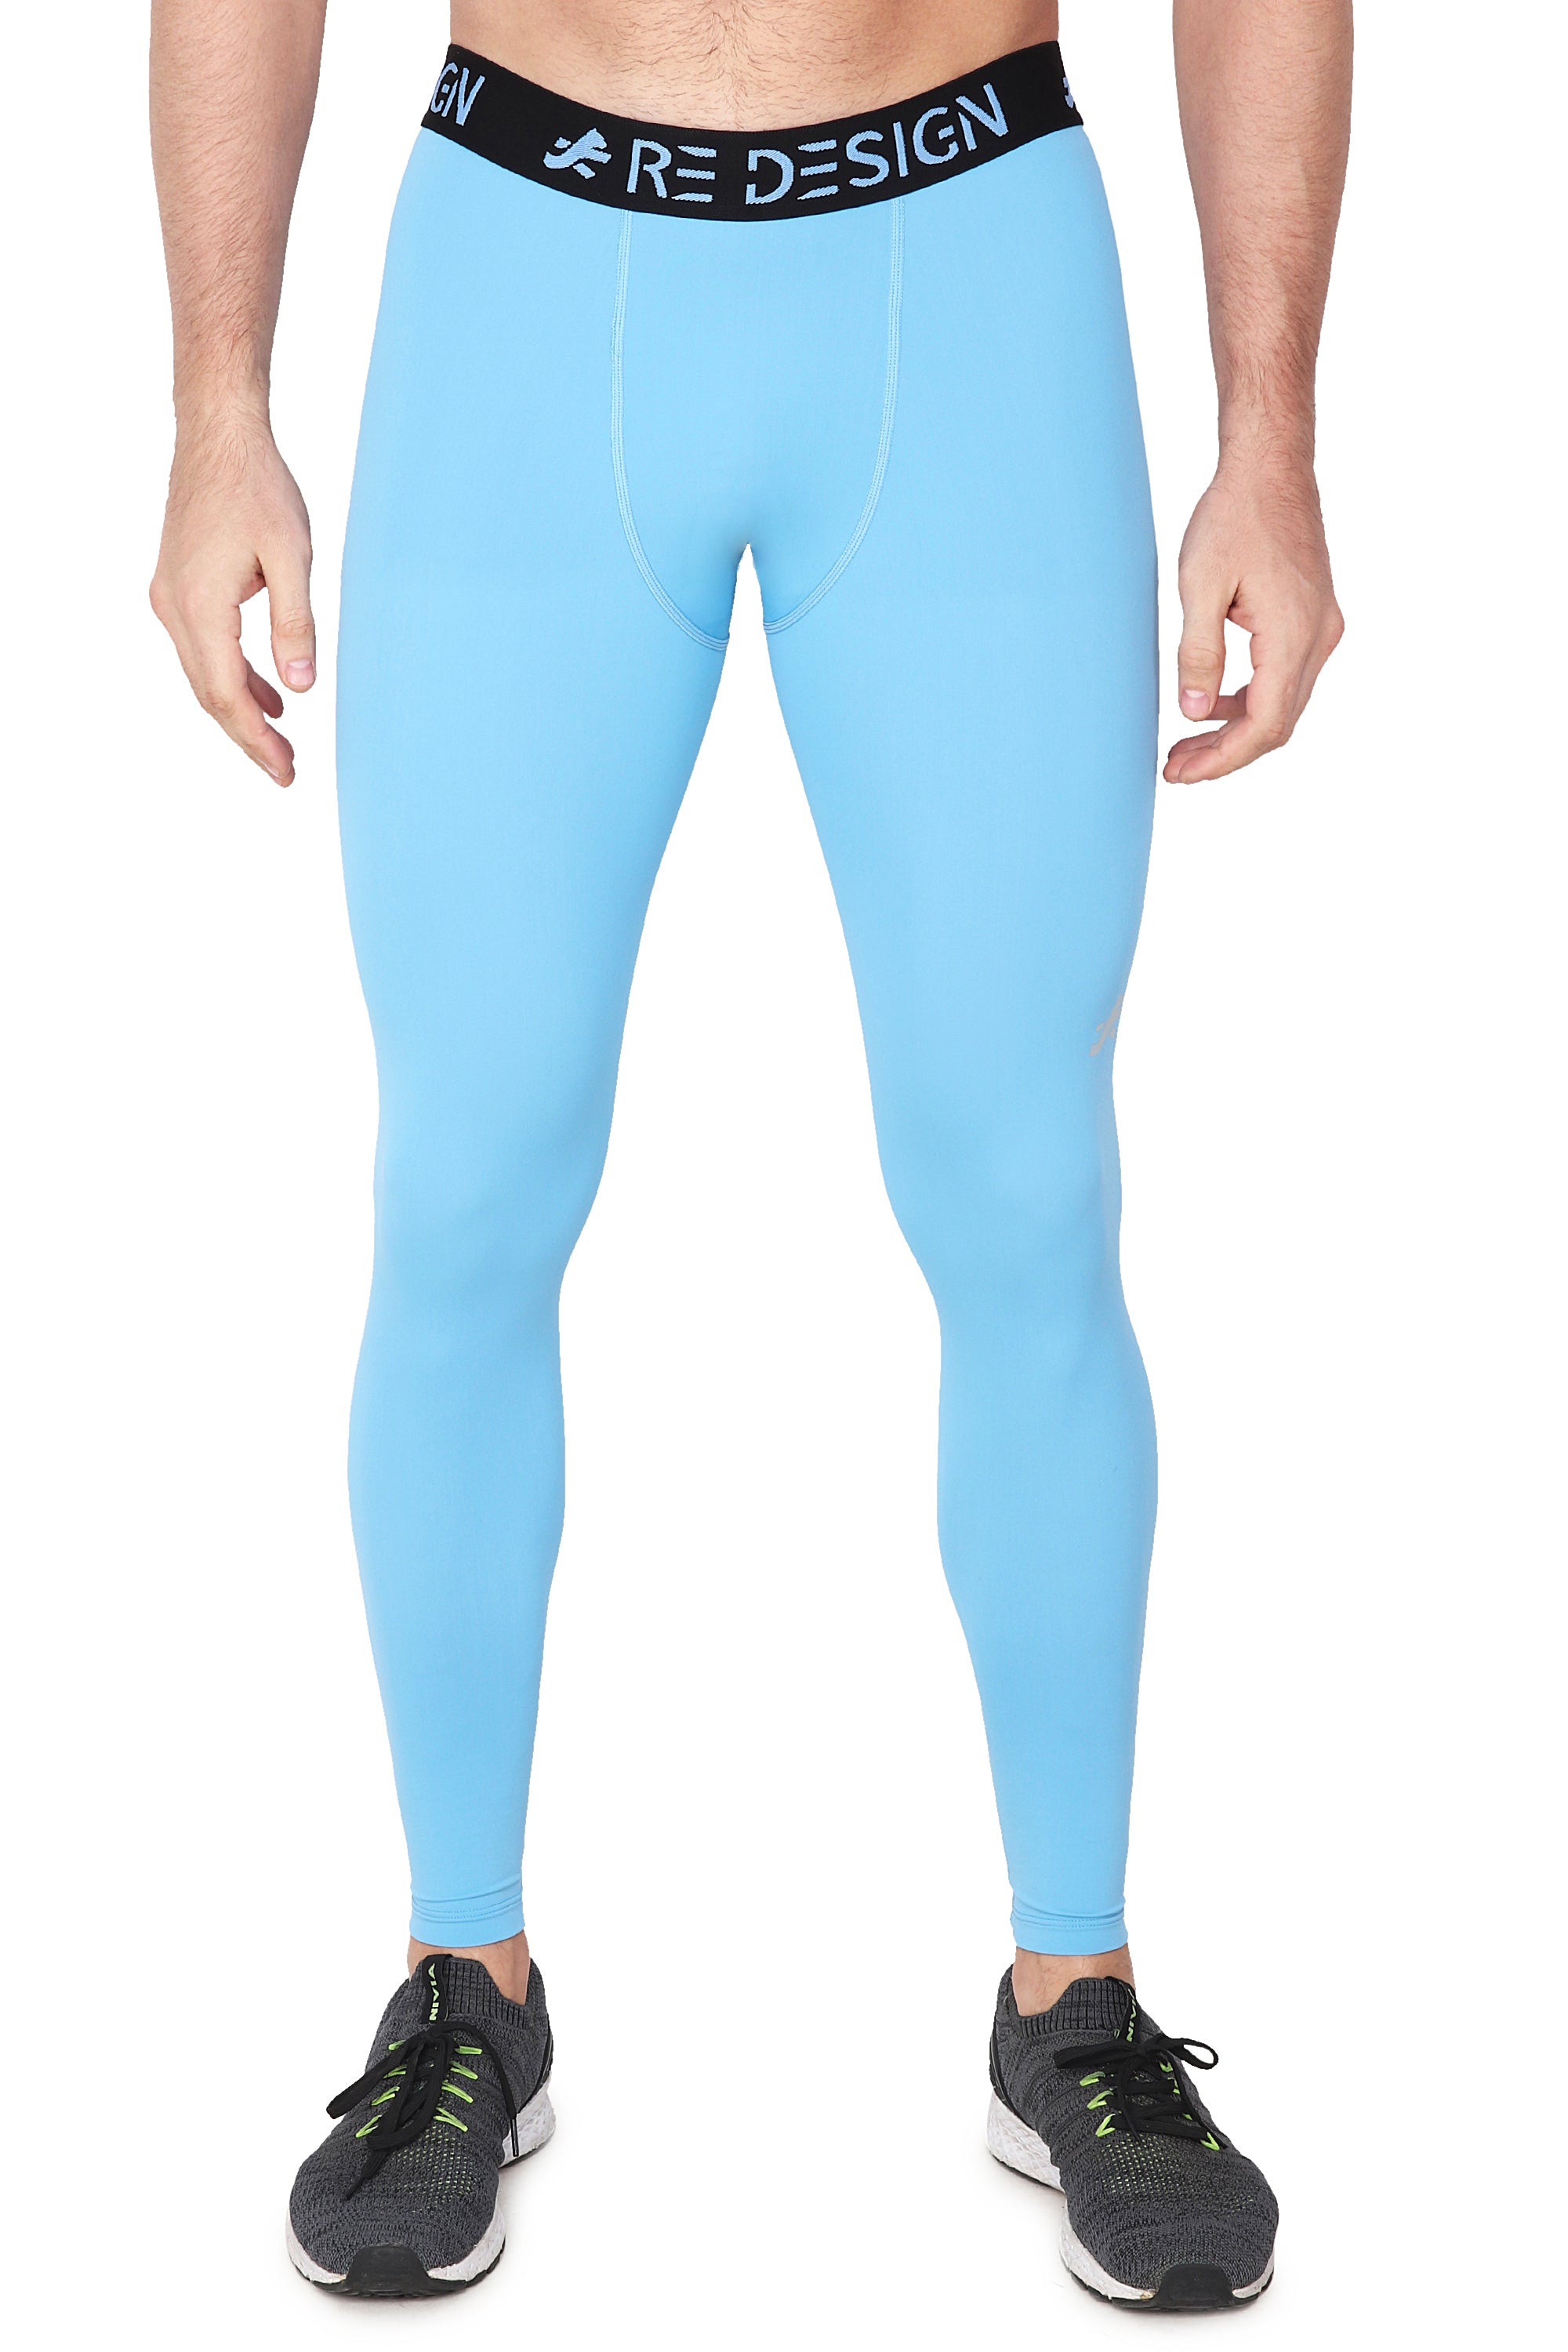 Nylon Compression Pant and Full Tights For Men (Sky Blue) – ReDesign Sports